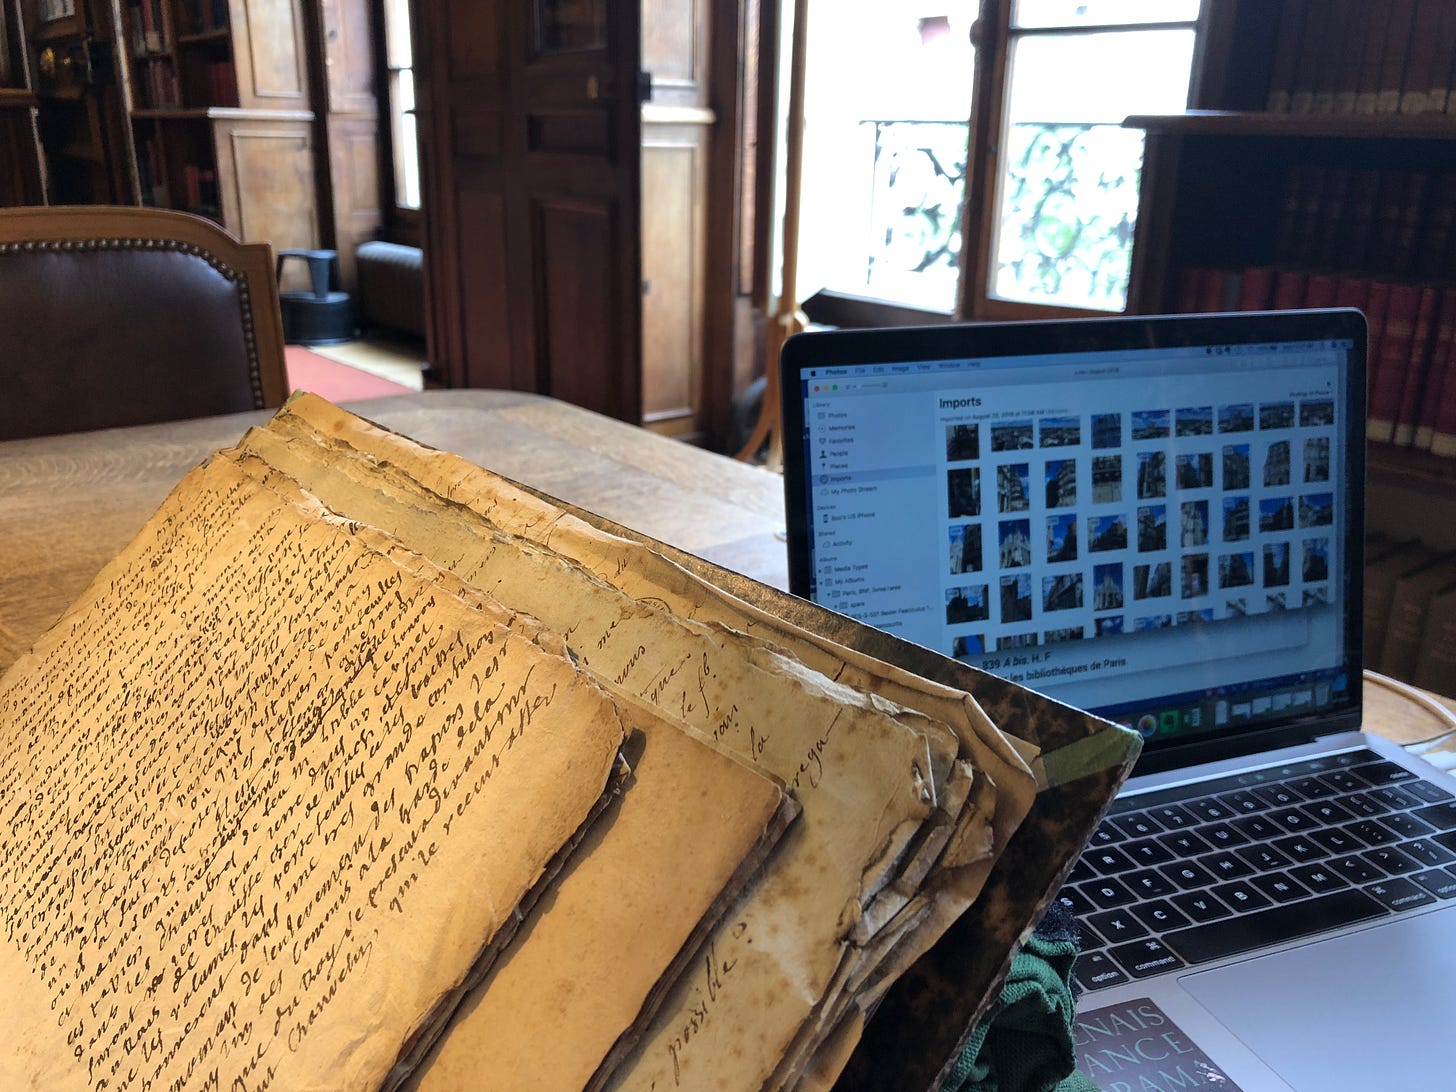 A Macbook showing the Photo program sits on a wooden desk with a manuscript volume in wood-panelled room with large windows.